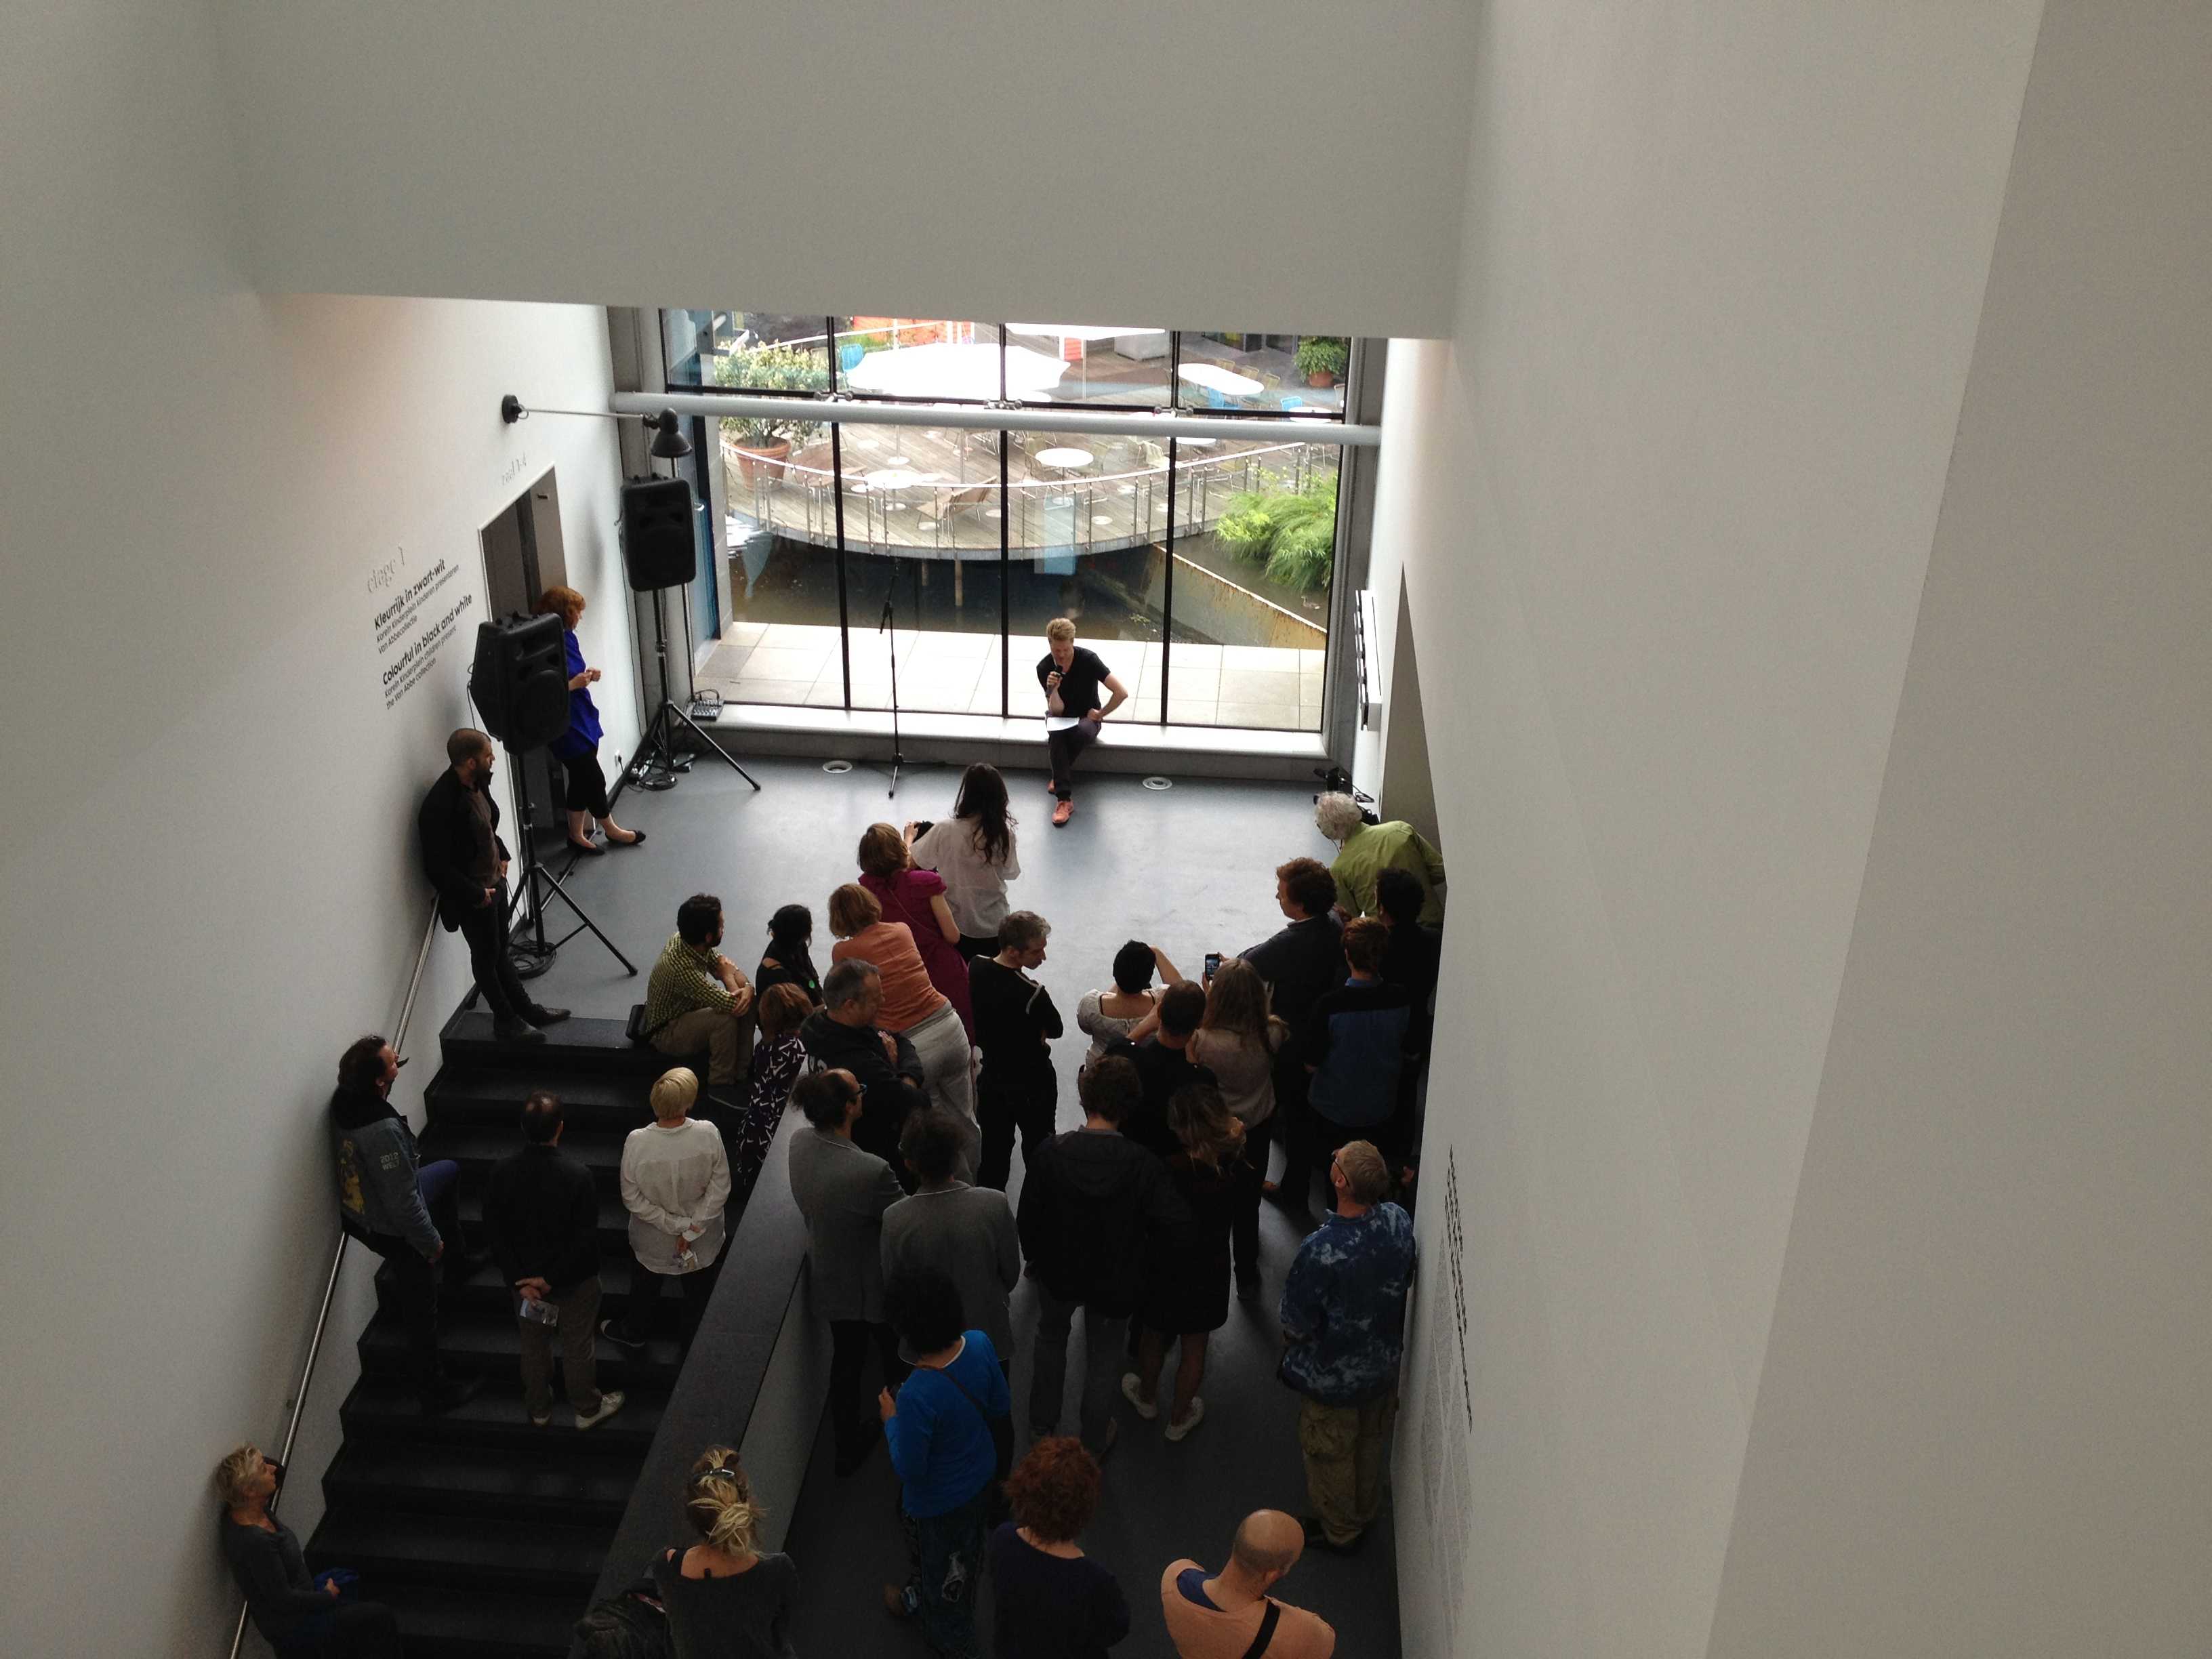 Yoeri Guepin 's lecture performance during the opening of Making Use ~ Dutch Art Institute at the Van Abbemuseum